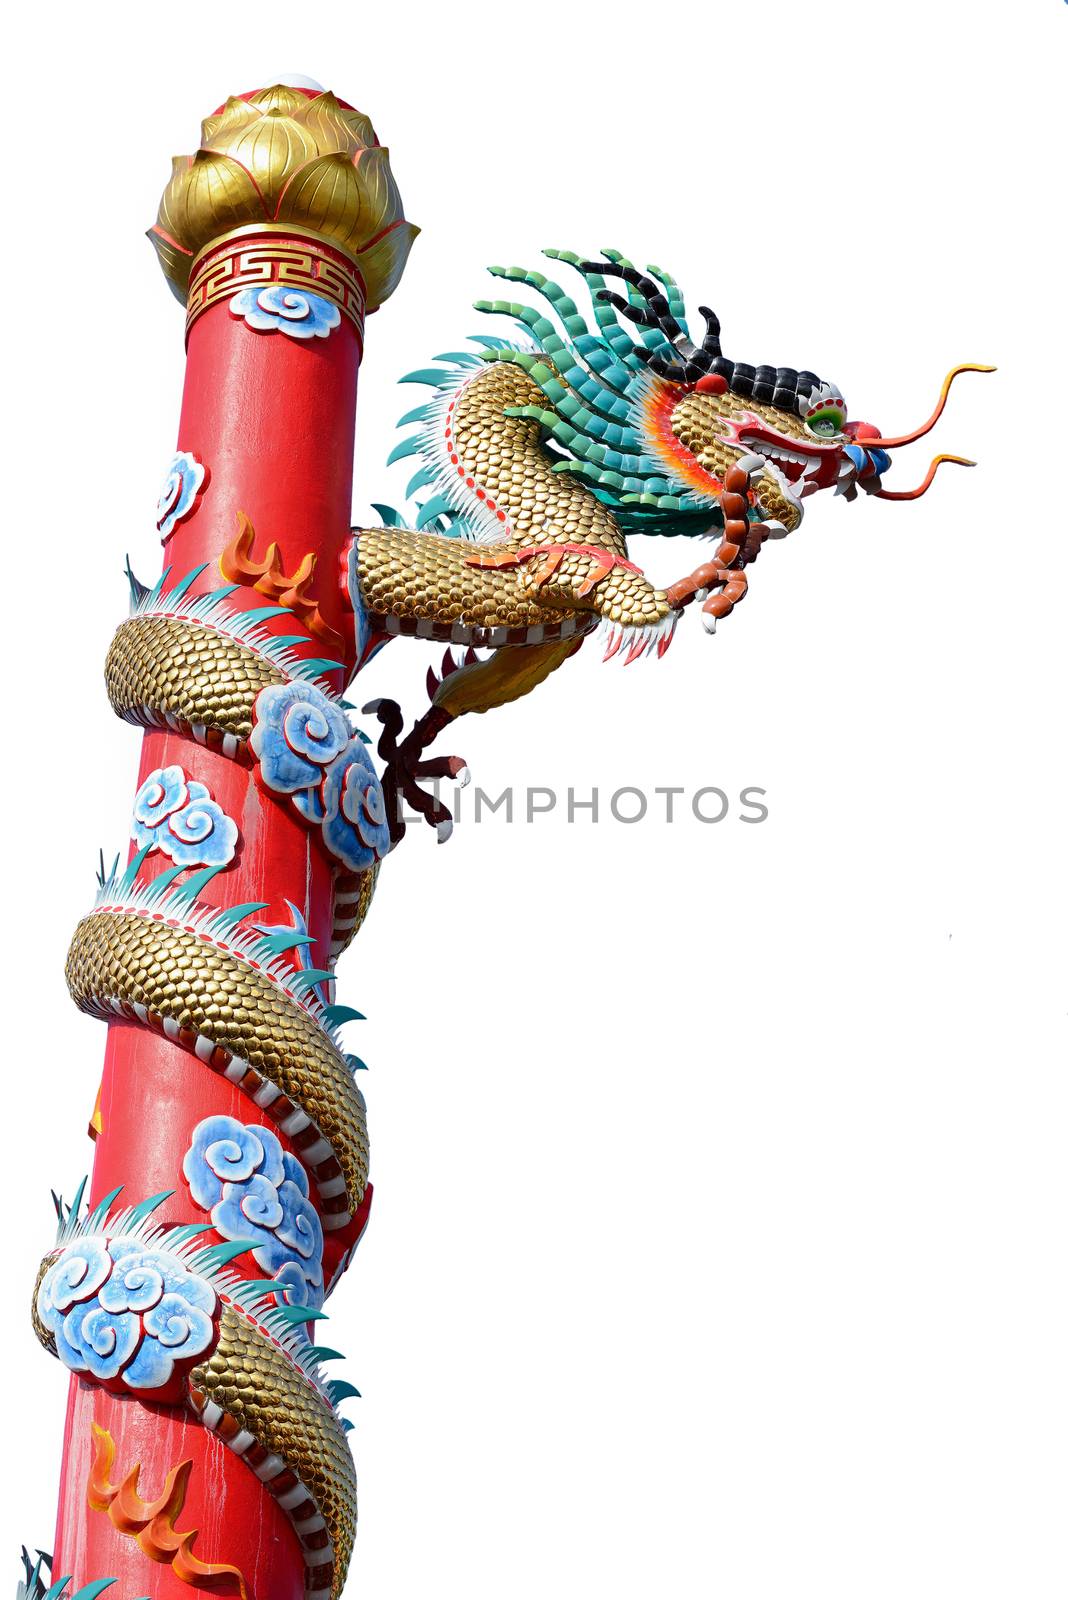 Chinese style golden dragon statue isolated on white background